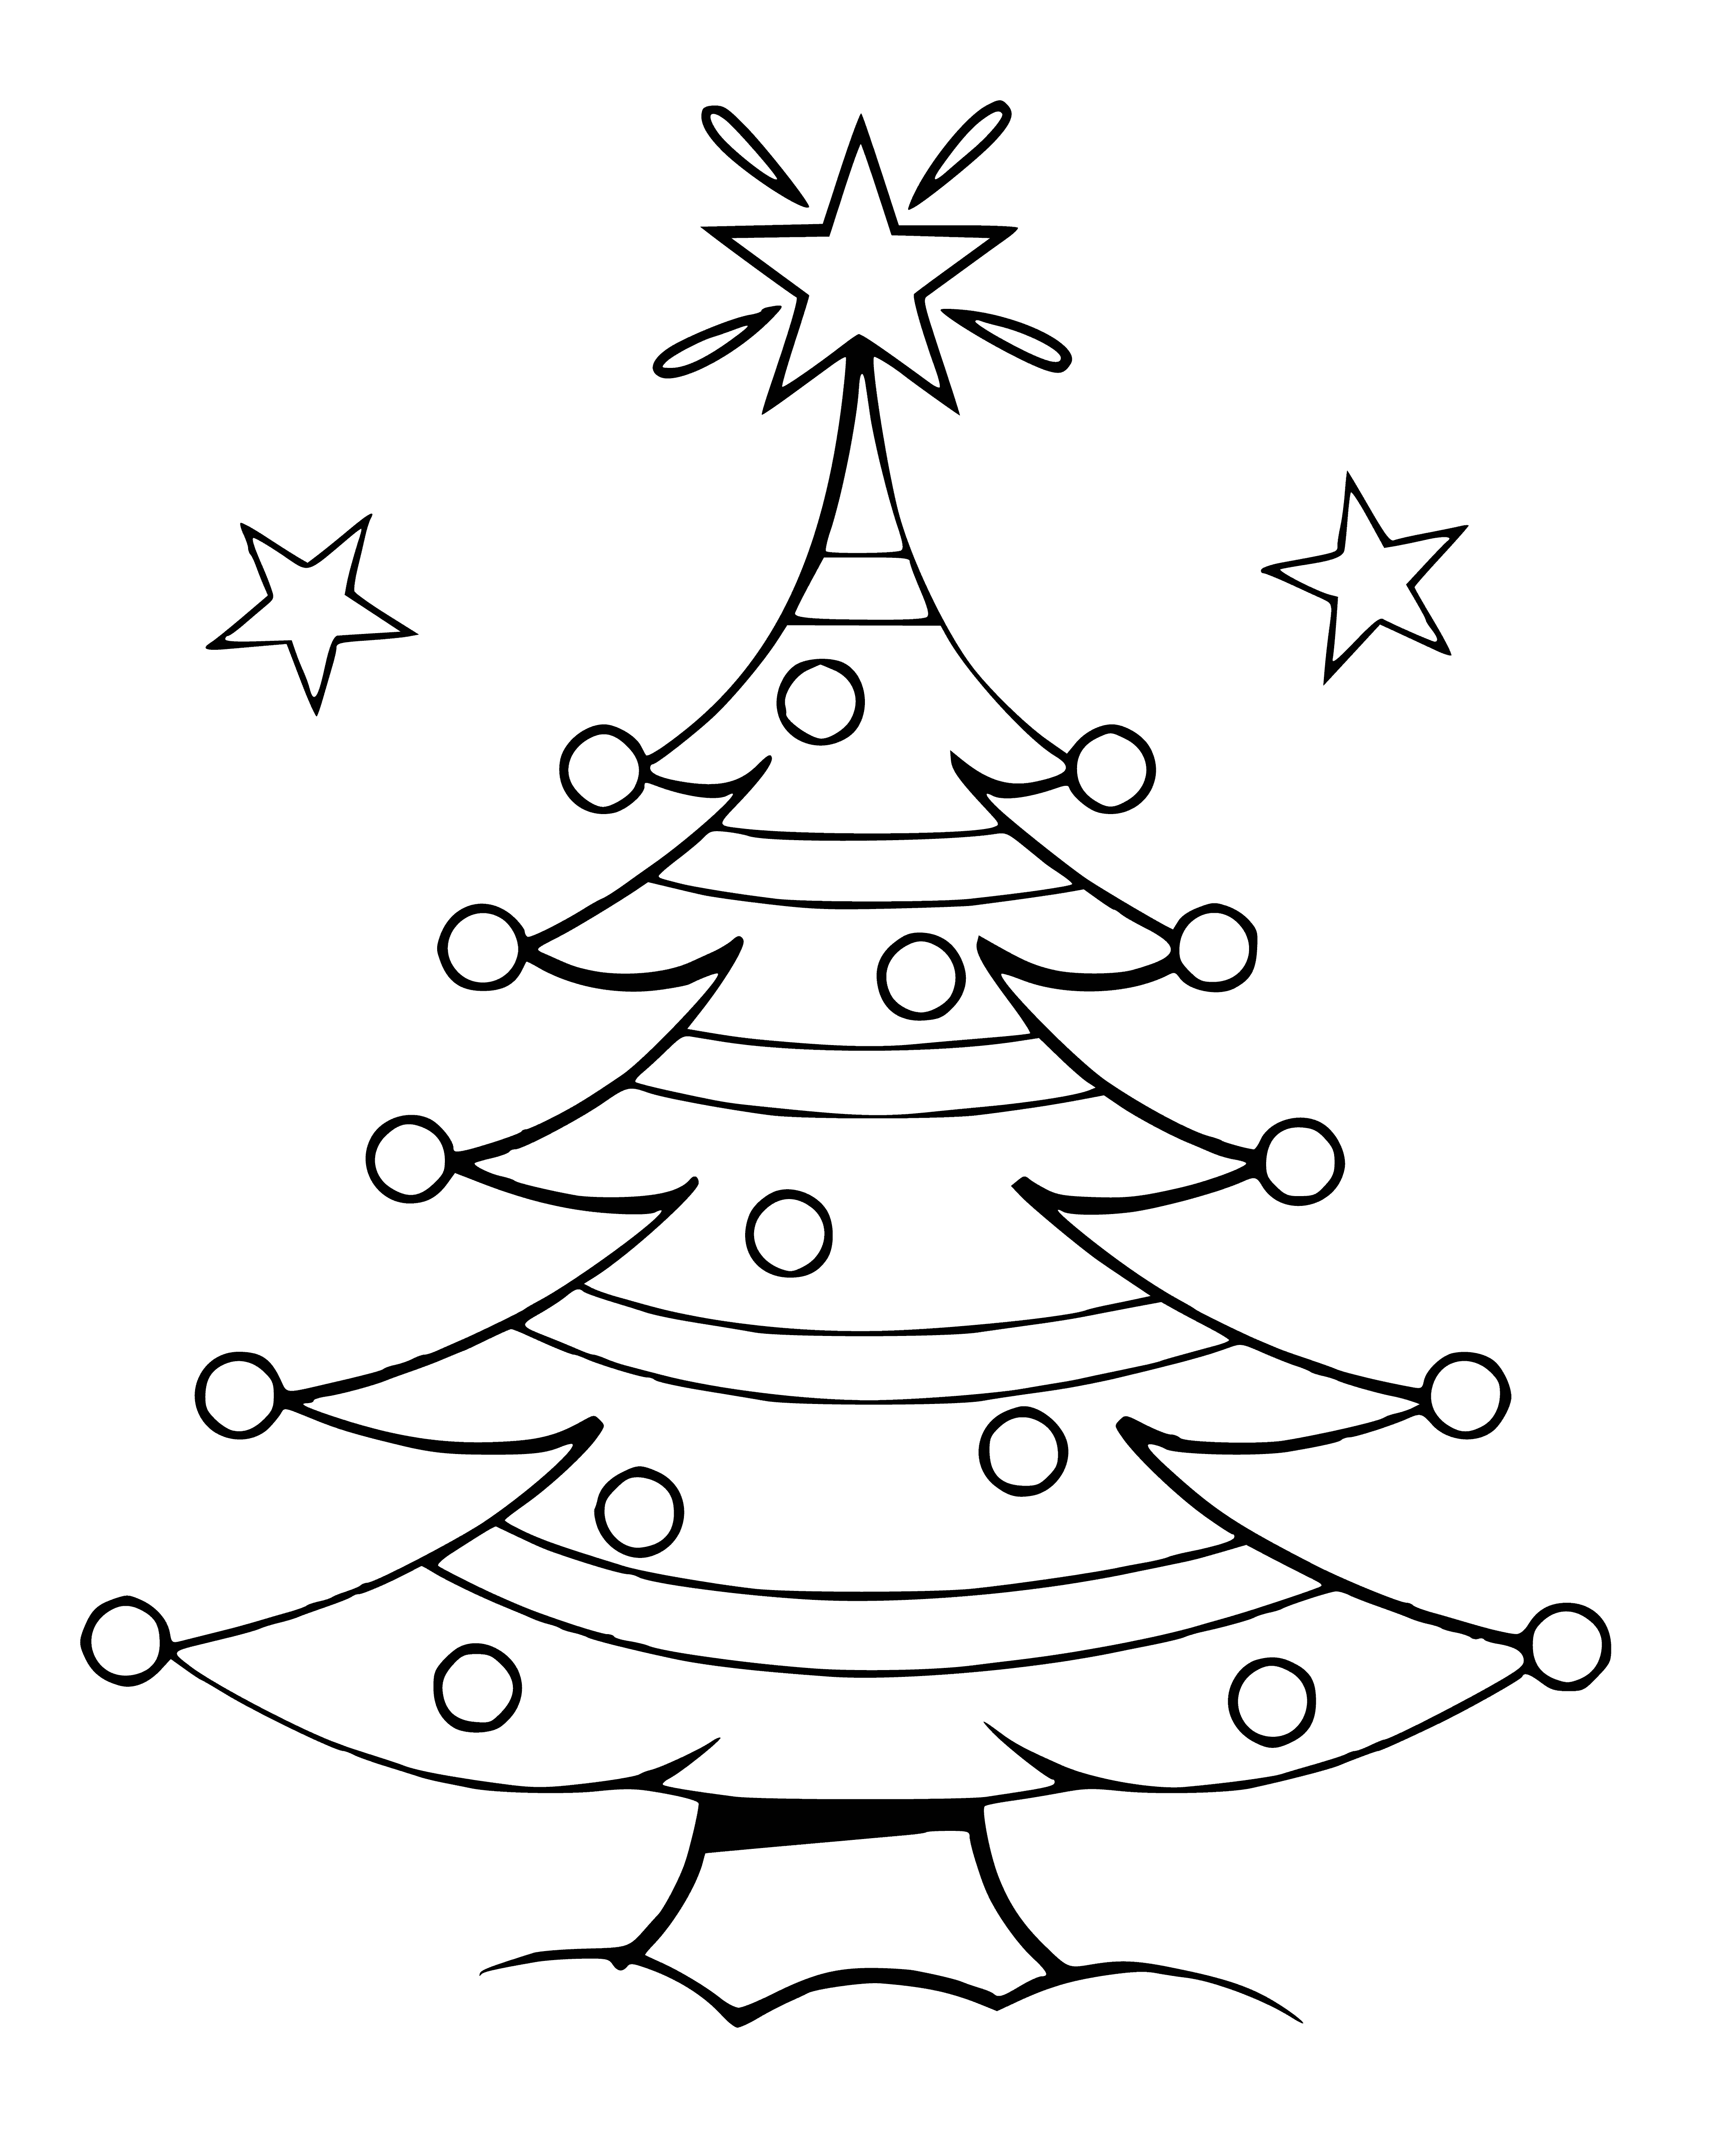 coloring page: Beautiful decorated Christmas tree w/ ornaments, garland, star; presents & fireplace to color for the holidays!